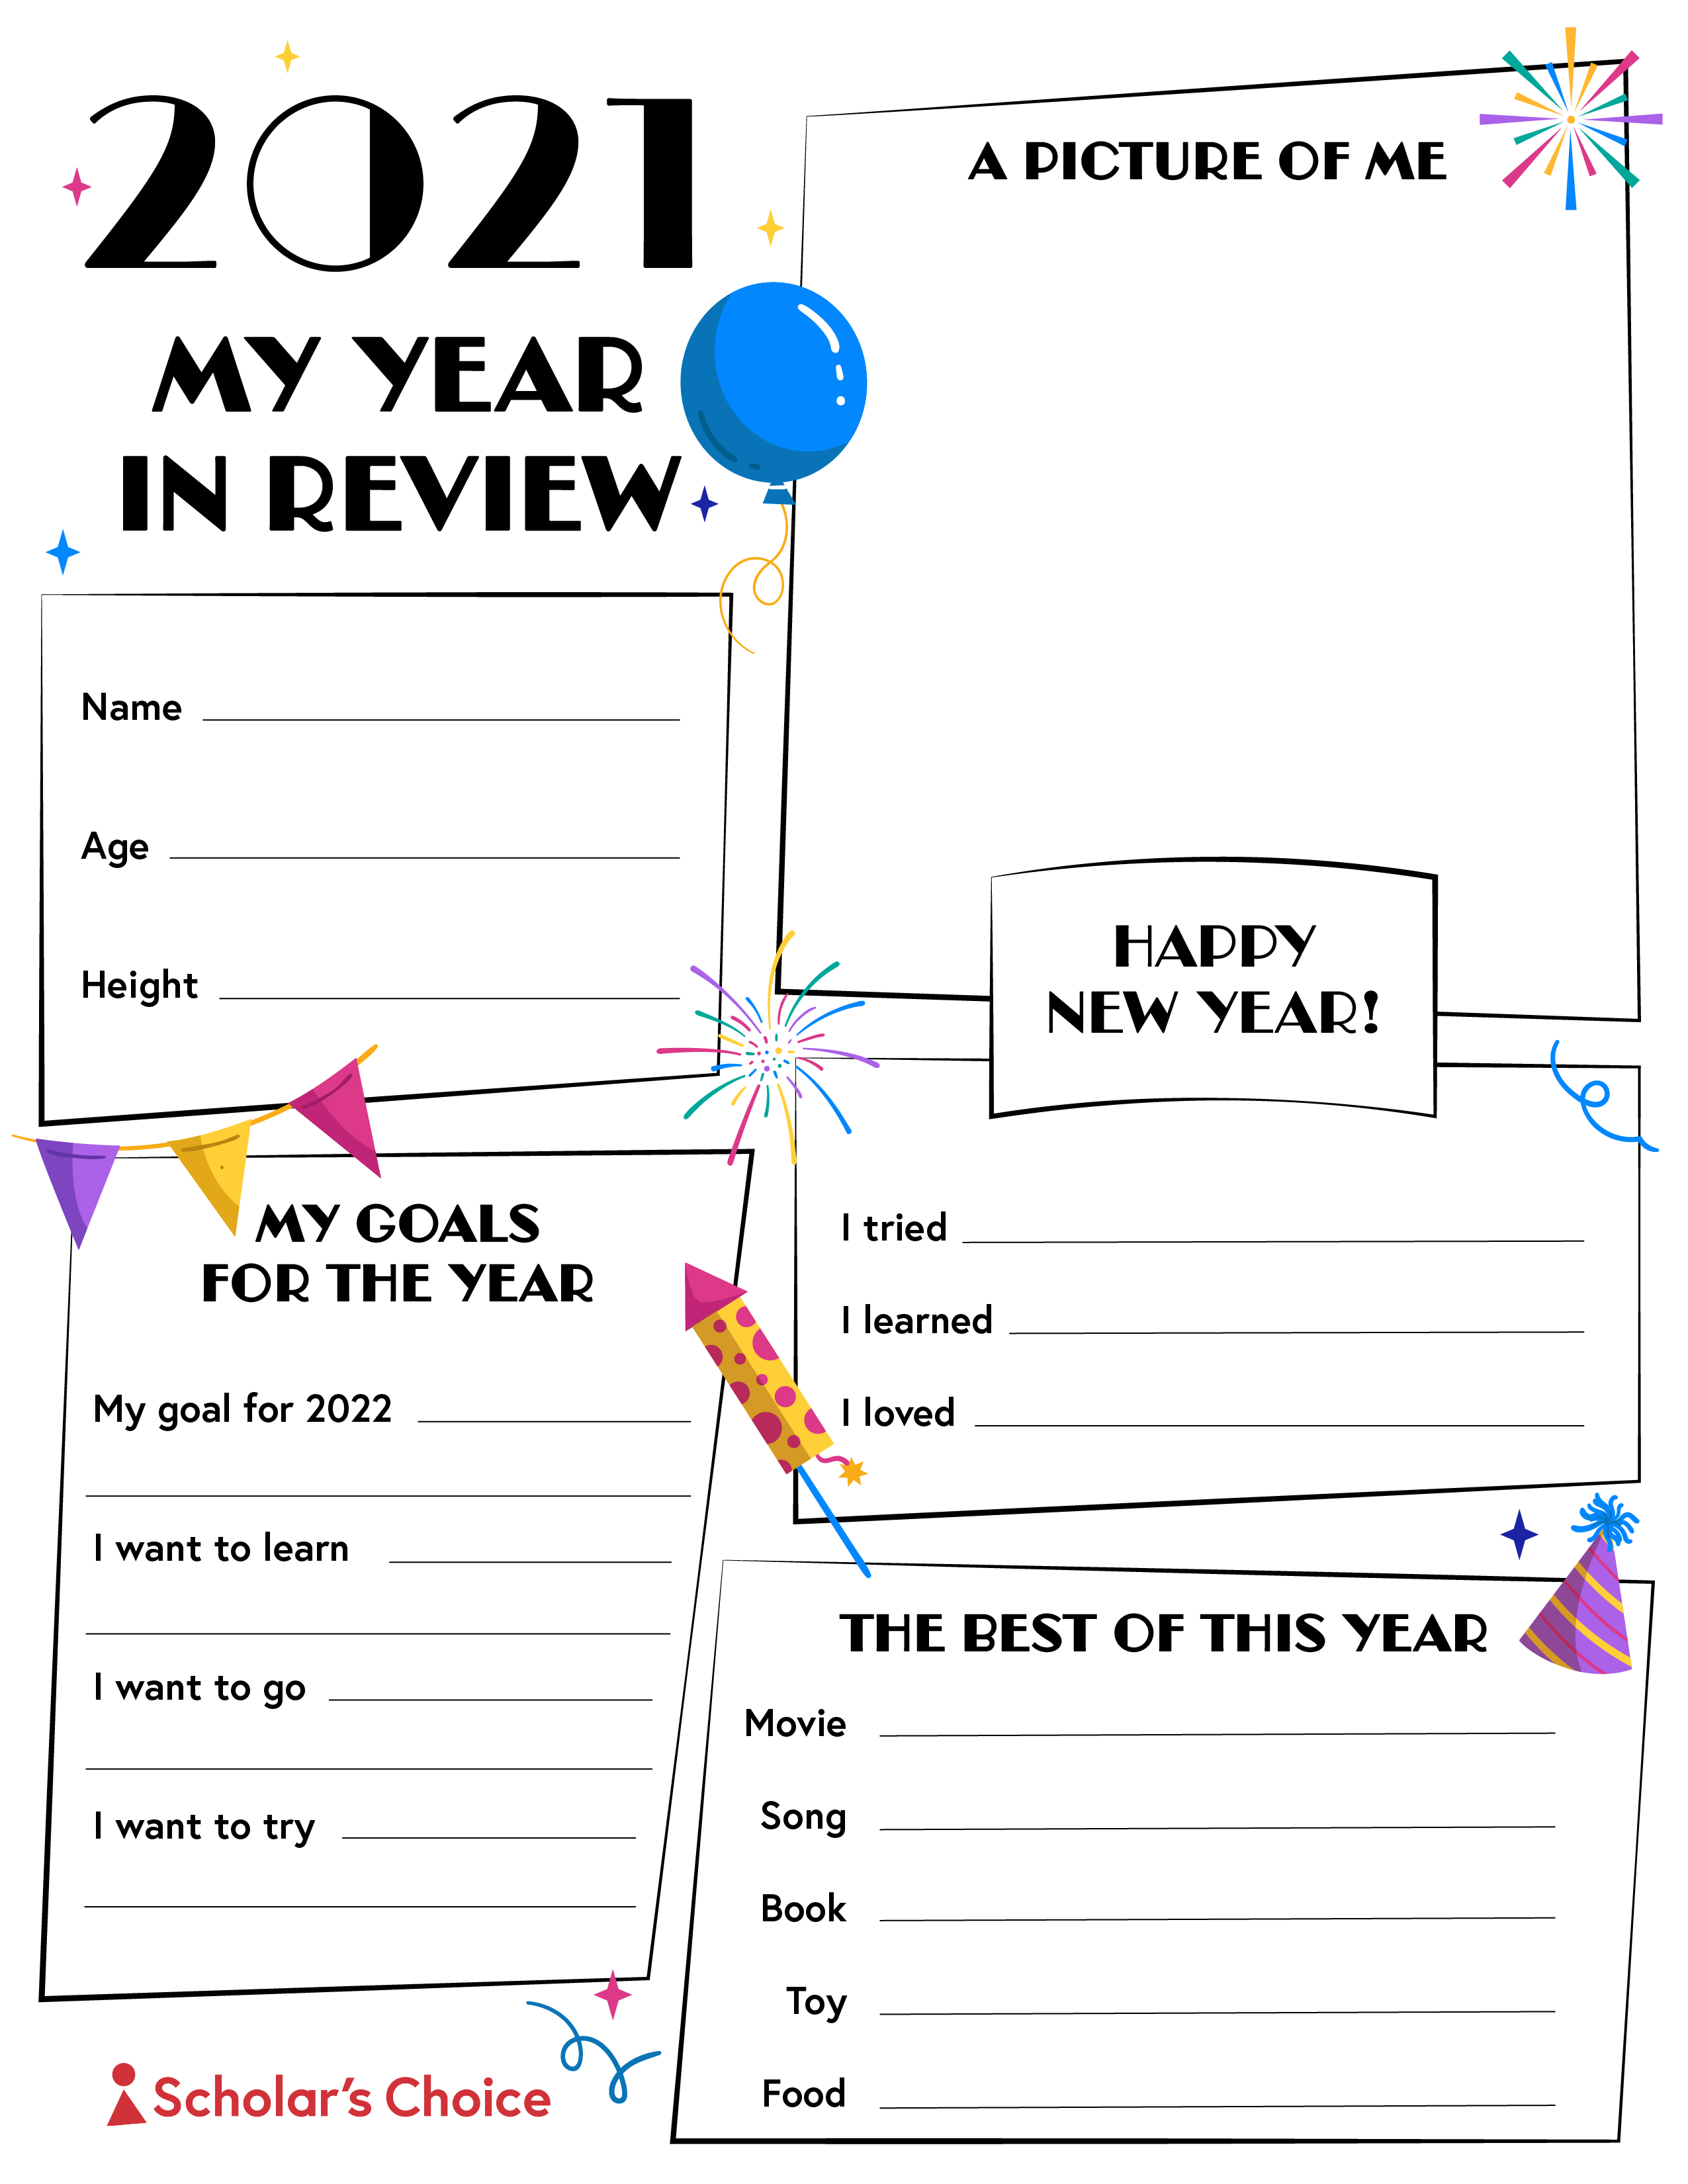 nye-year_in_review